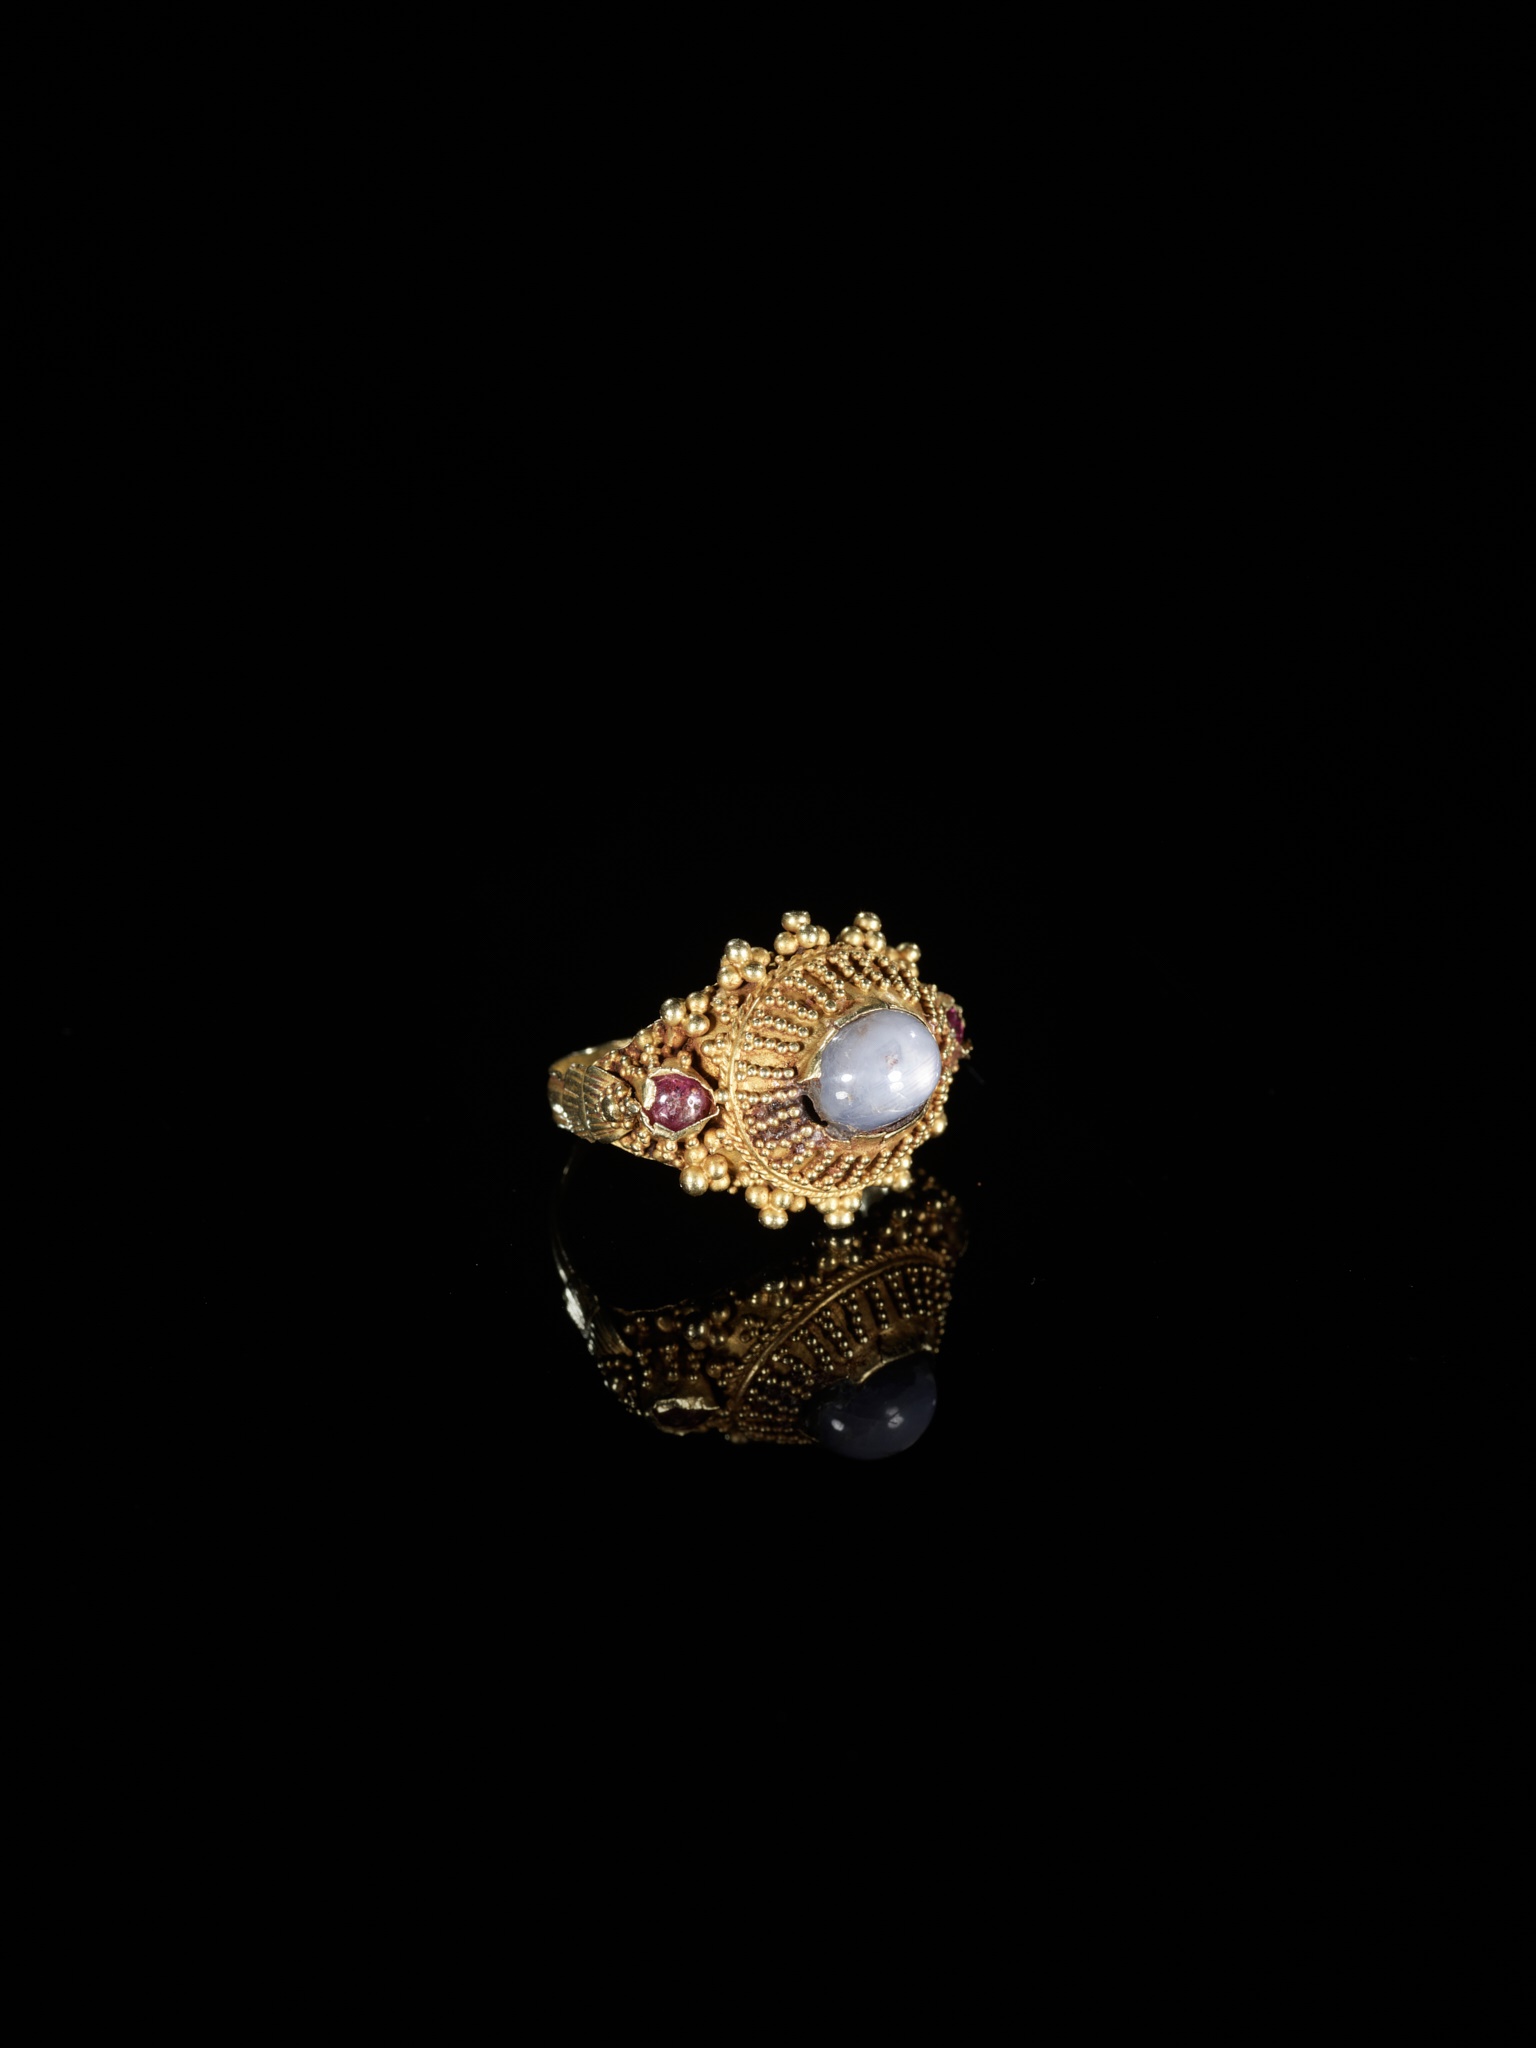 A GOLD PRIEST'S RING INLAID WITH A MOONSTONE AND TWO SMALL GARNETS - Image 2 of 6